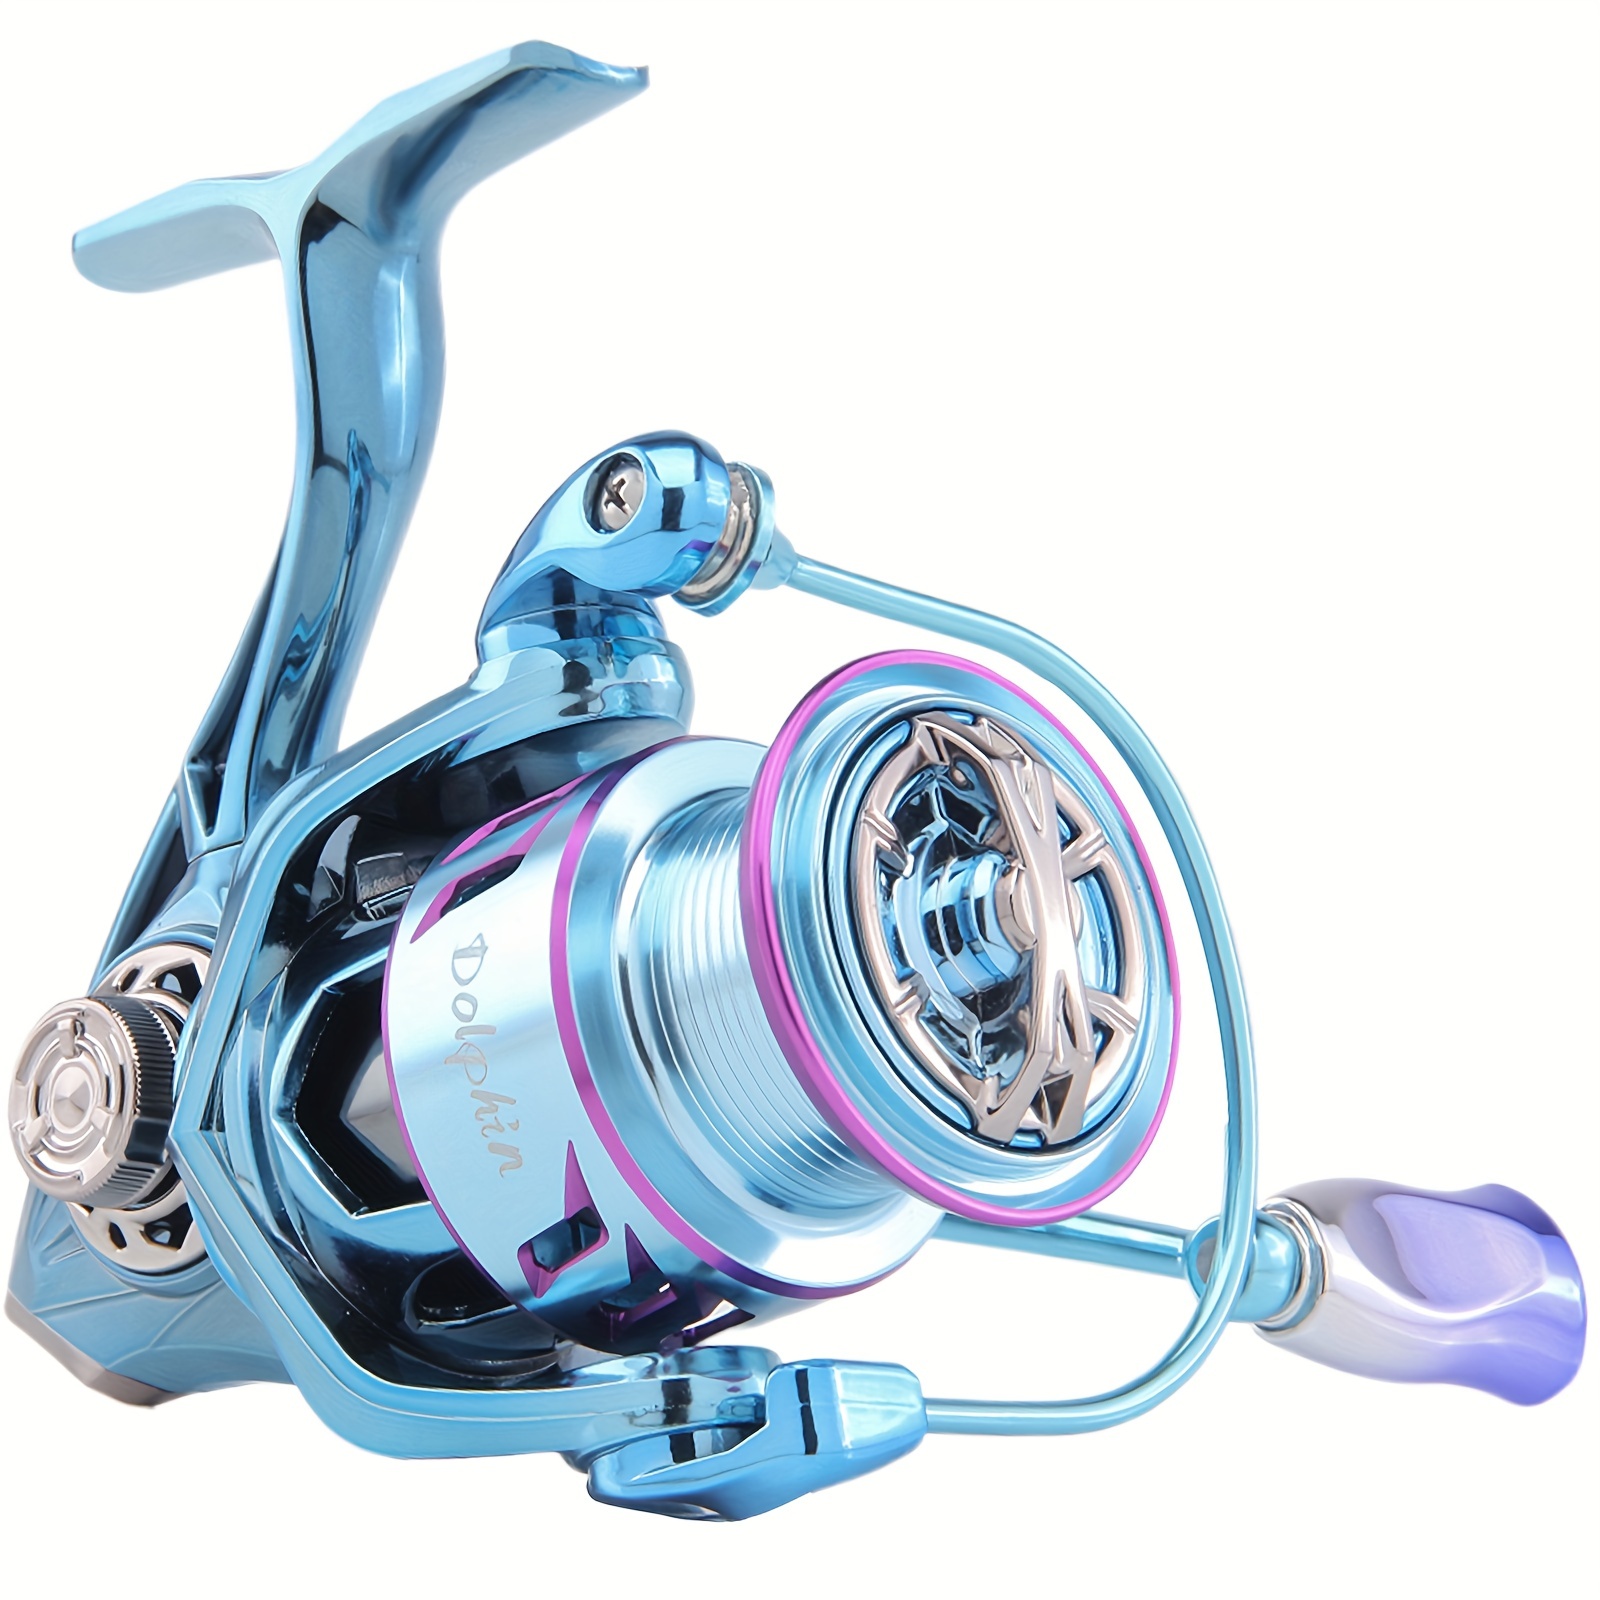 * Dolphin 1500/2500/3000 Advance Edition Spinning Reel, 5.2:1Gear Ratio,  22LBS, 5+1BB, Backlash Free Bearing, Sealed Drag System, Saltwater, Fr